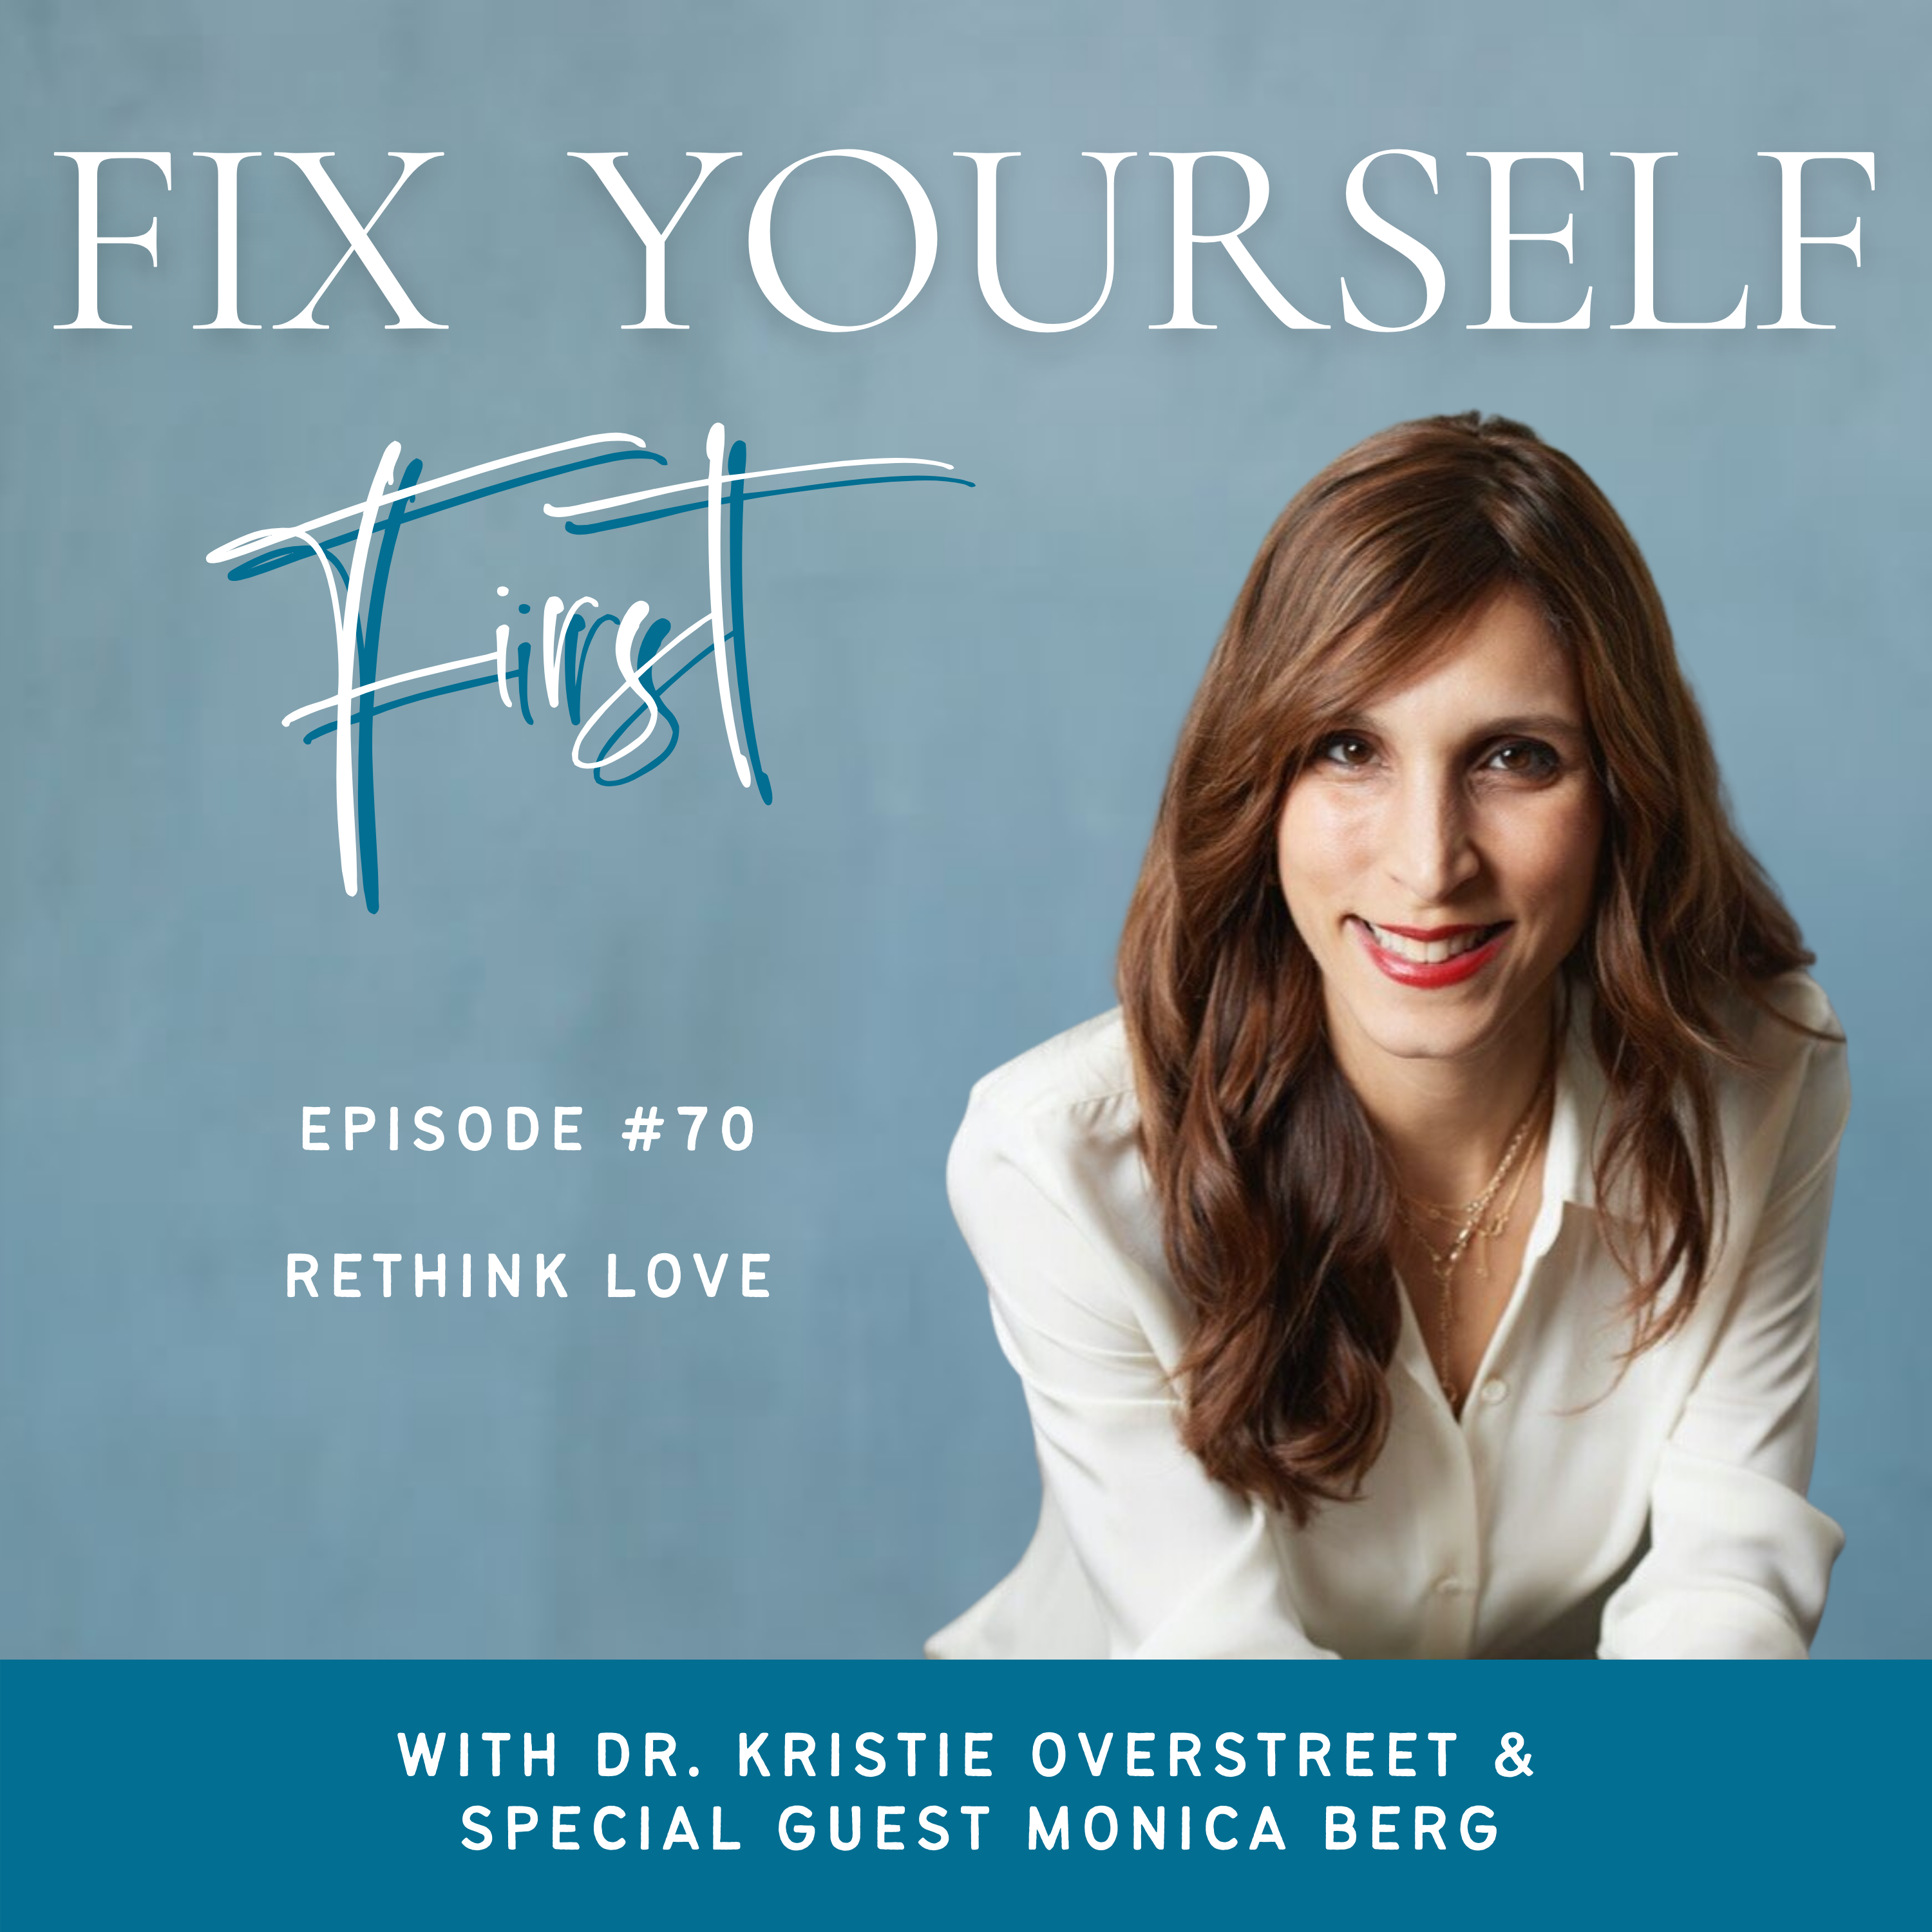 Fix Yourself First - Episode 70